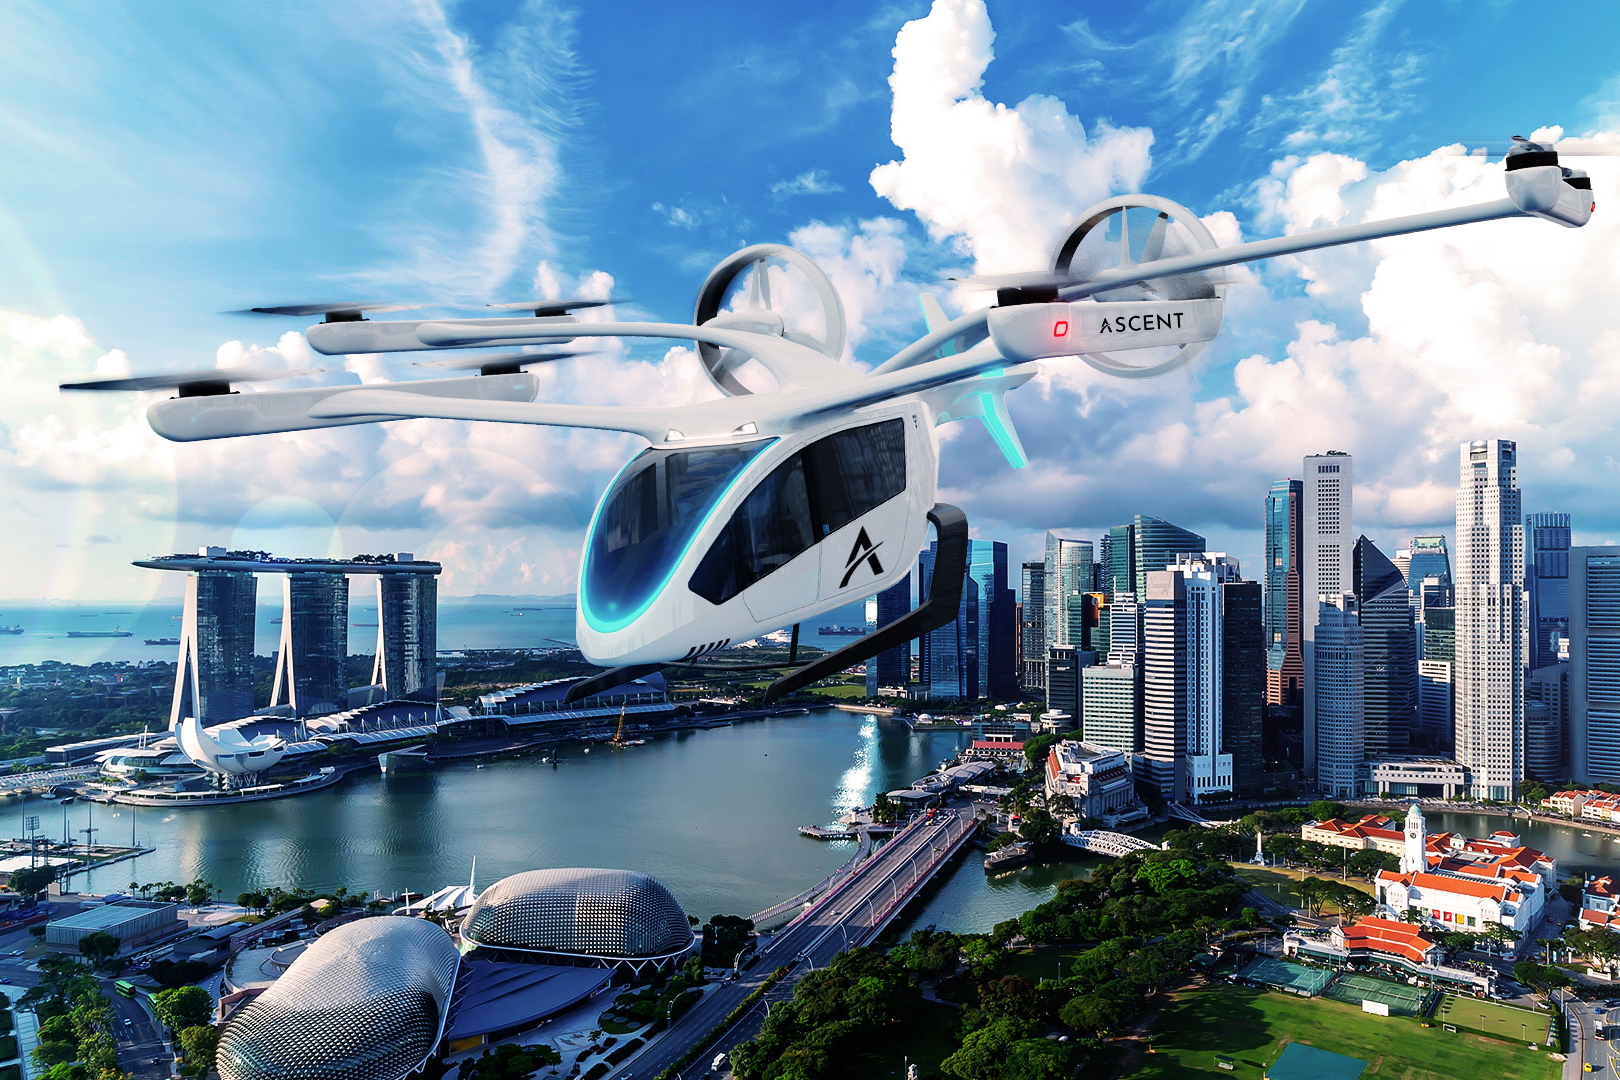 Beginning in 2026, Eve will provide Ascent with up to 100,000 hours of flight time per year on its electrical vertical takeoff and landing (eVTOL) aircraft, also known as EVA (Electrical Vertical Aircraft), for use in key cities such as Bangkok (Thailand), Manila (Philippines), Melbourne (Australia), Singapore, and Tokyo (Japan). Click to enlarge.